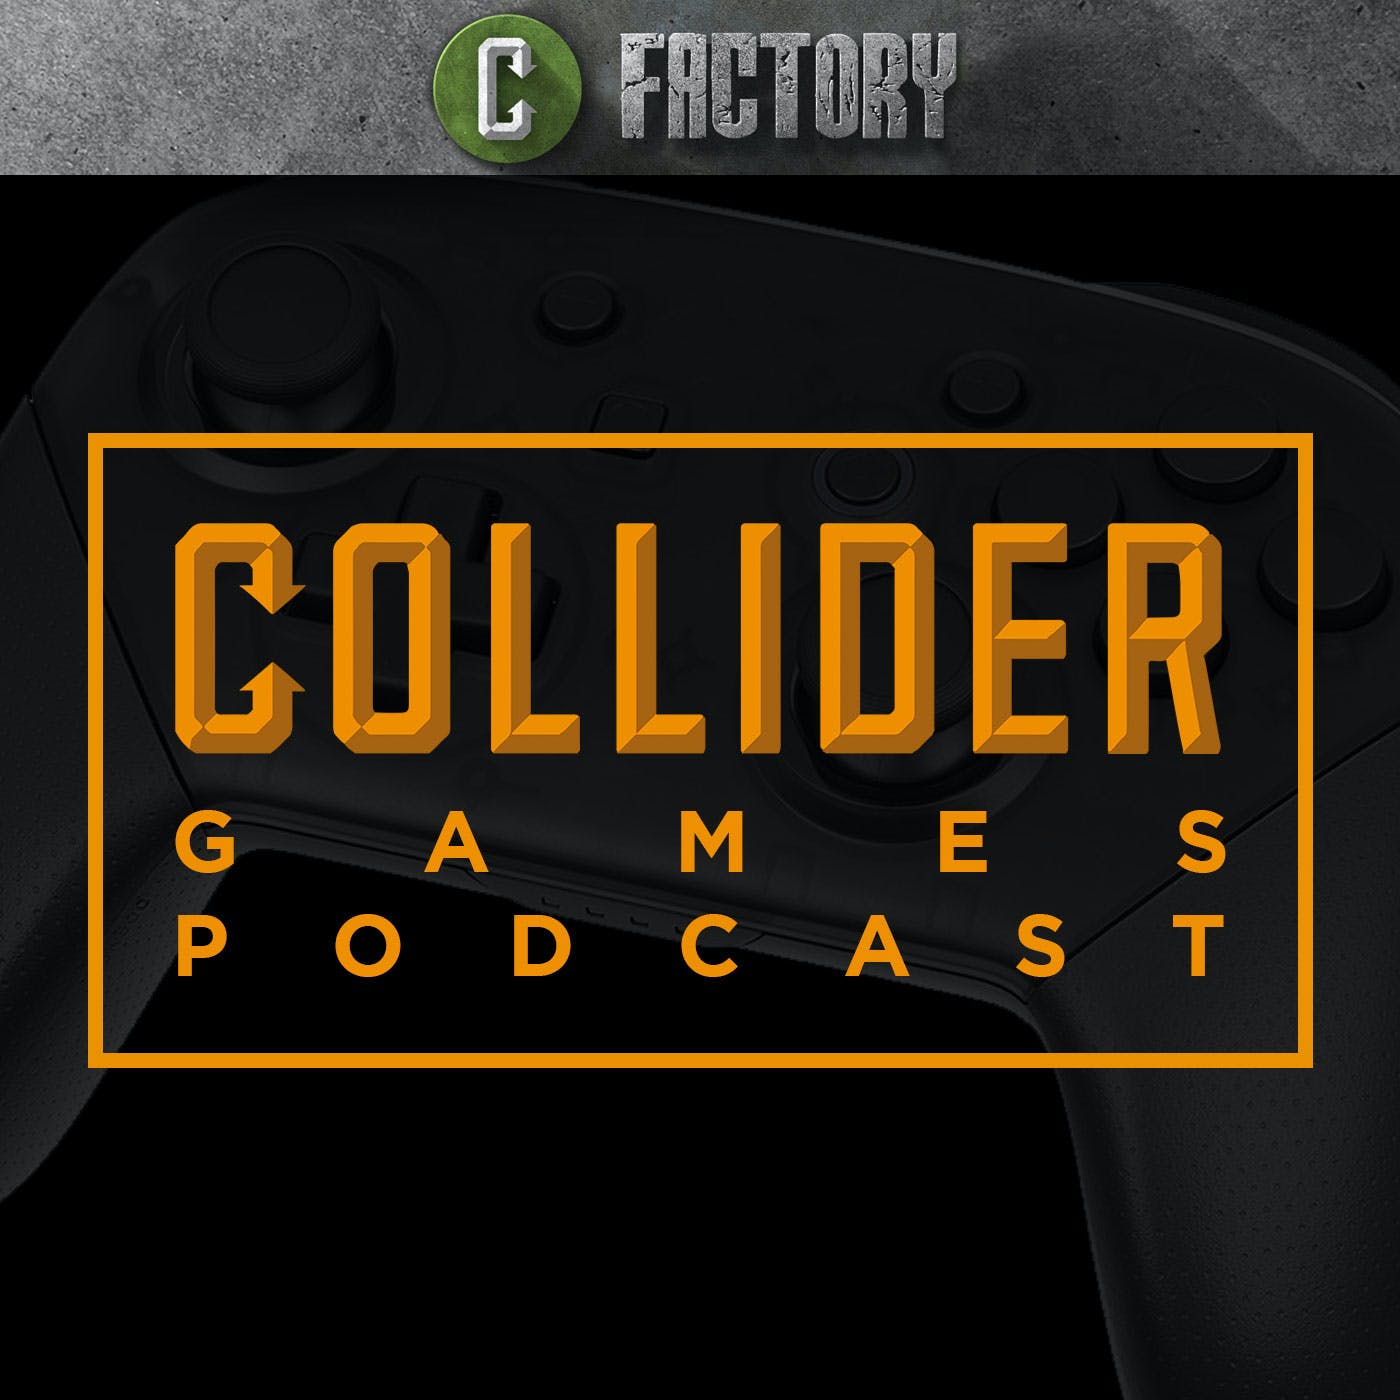 How Much Will The Xbox Series X and PS5 Cost? - Collider Games Podcast